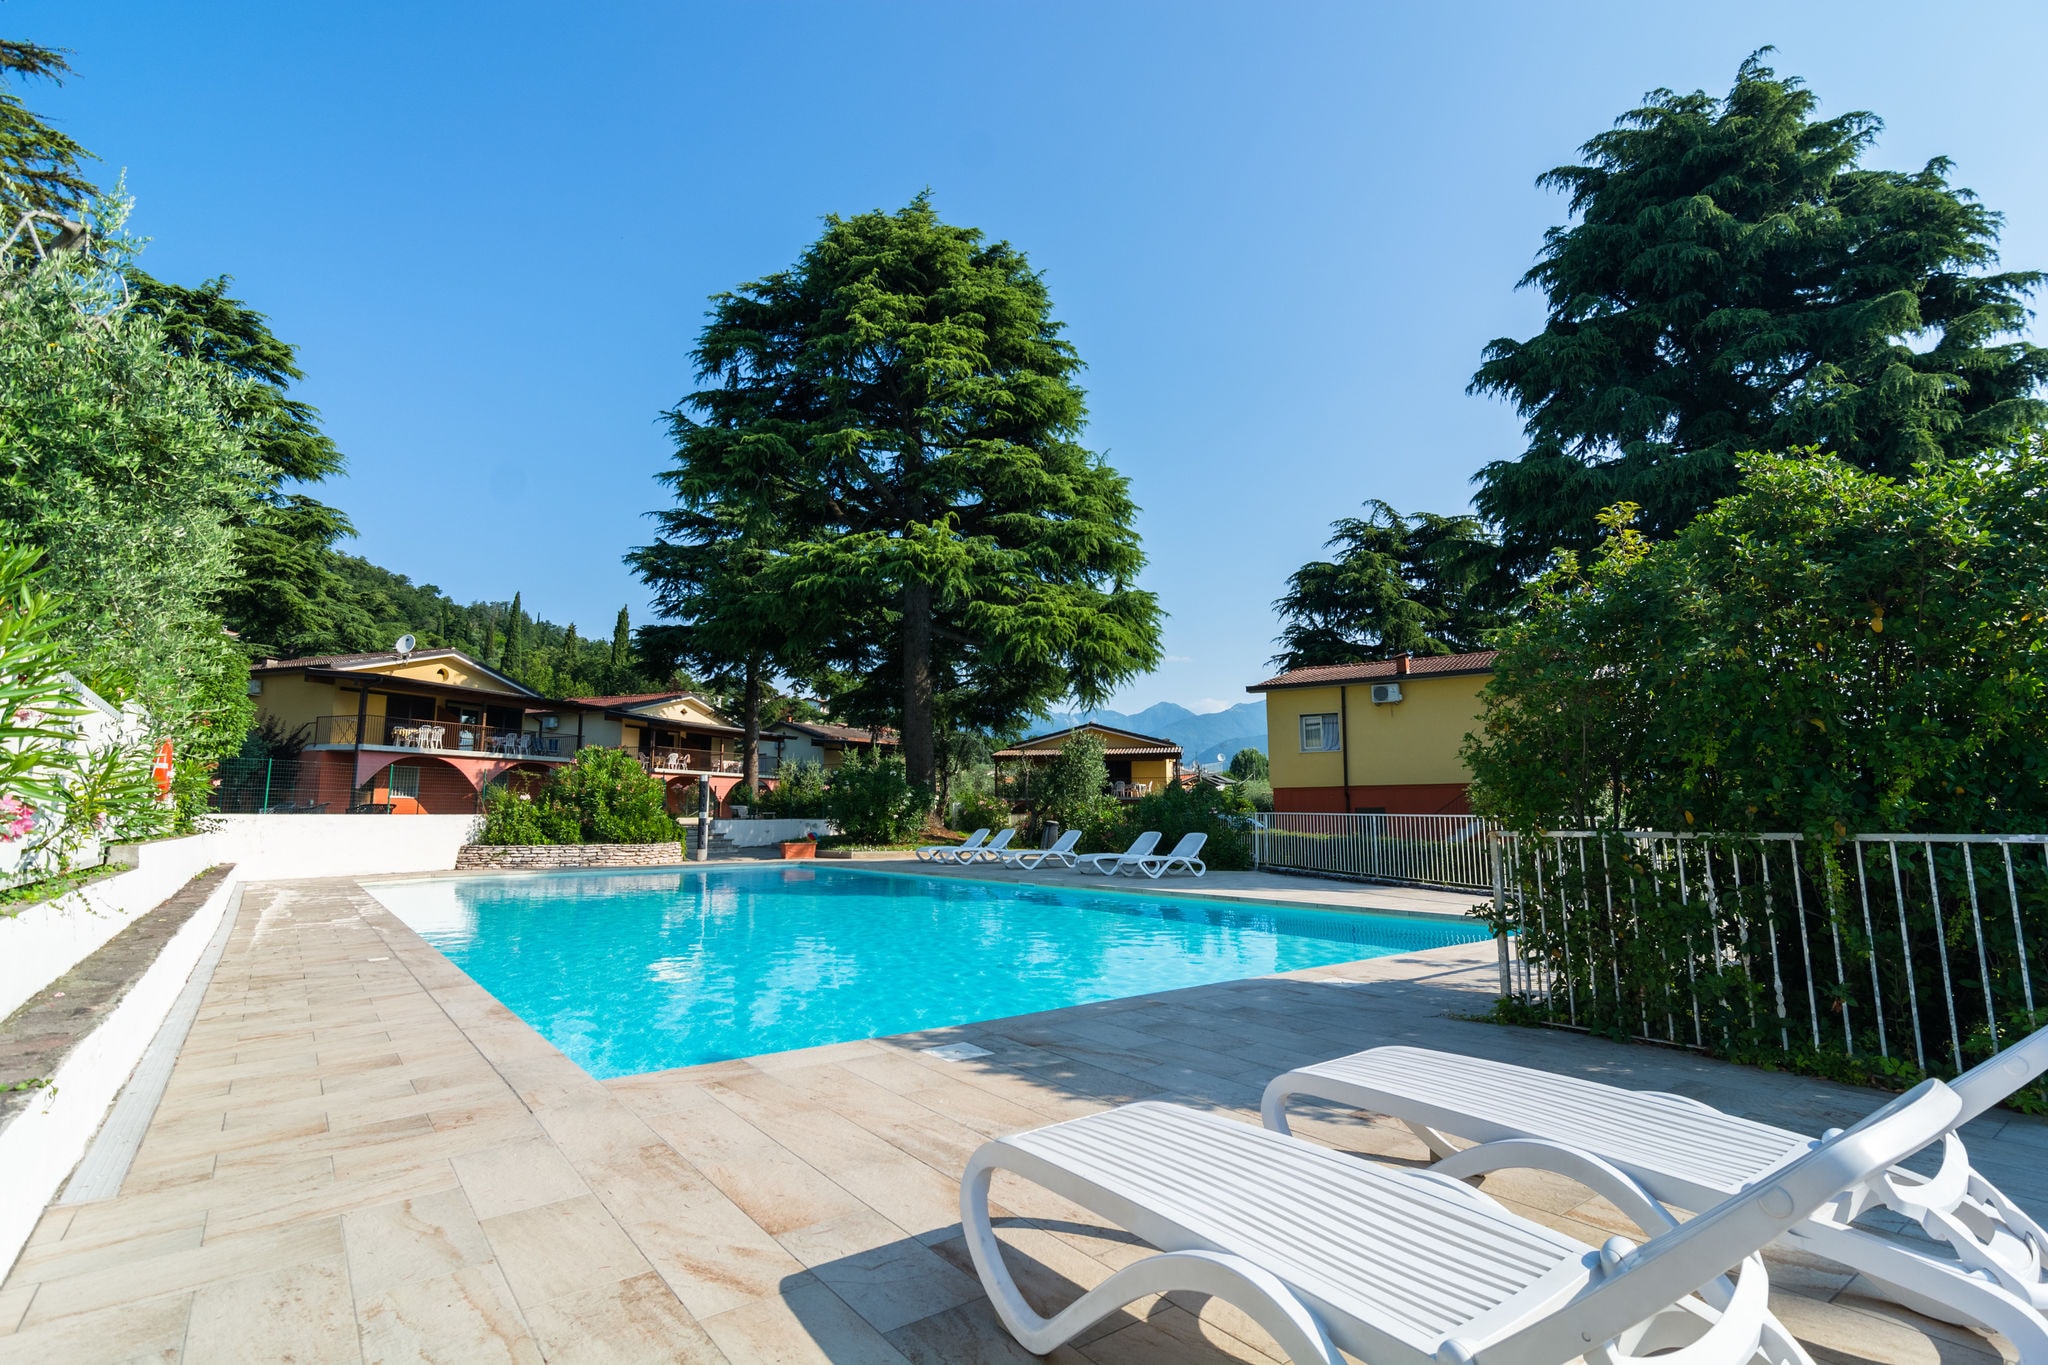 Apartment on Lake Garda with pebble beach, pier for boat, three swimming pools